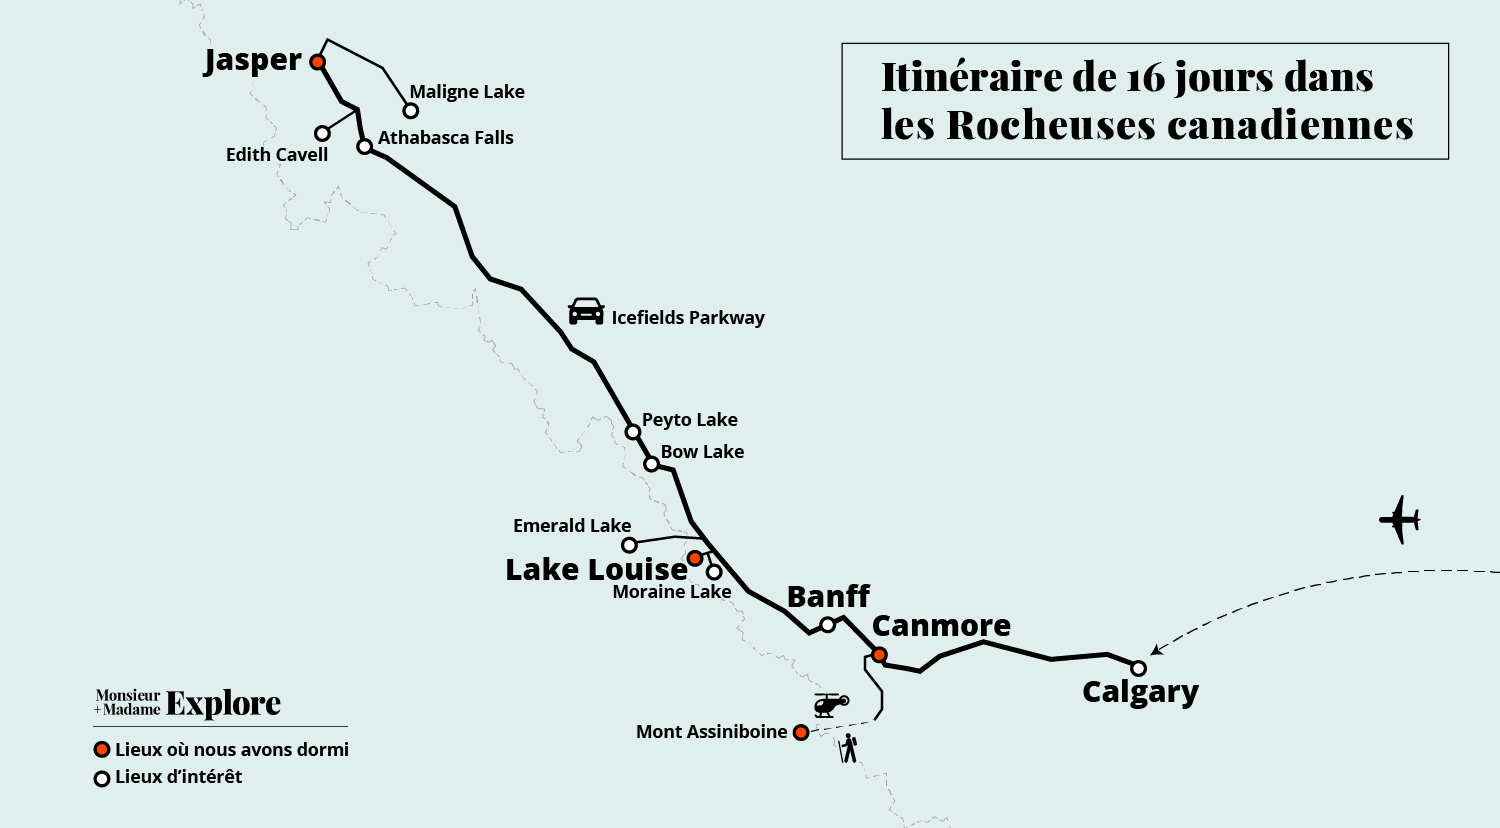 Carte et itinéraire dans les Rocheuses canadiennes, Alberta, BC, Canada / Map and itinerary in the Canadian Rockies, Alberta, BC, Canada